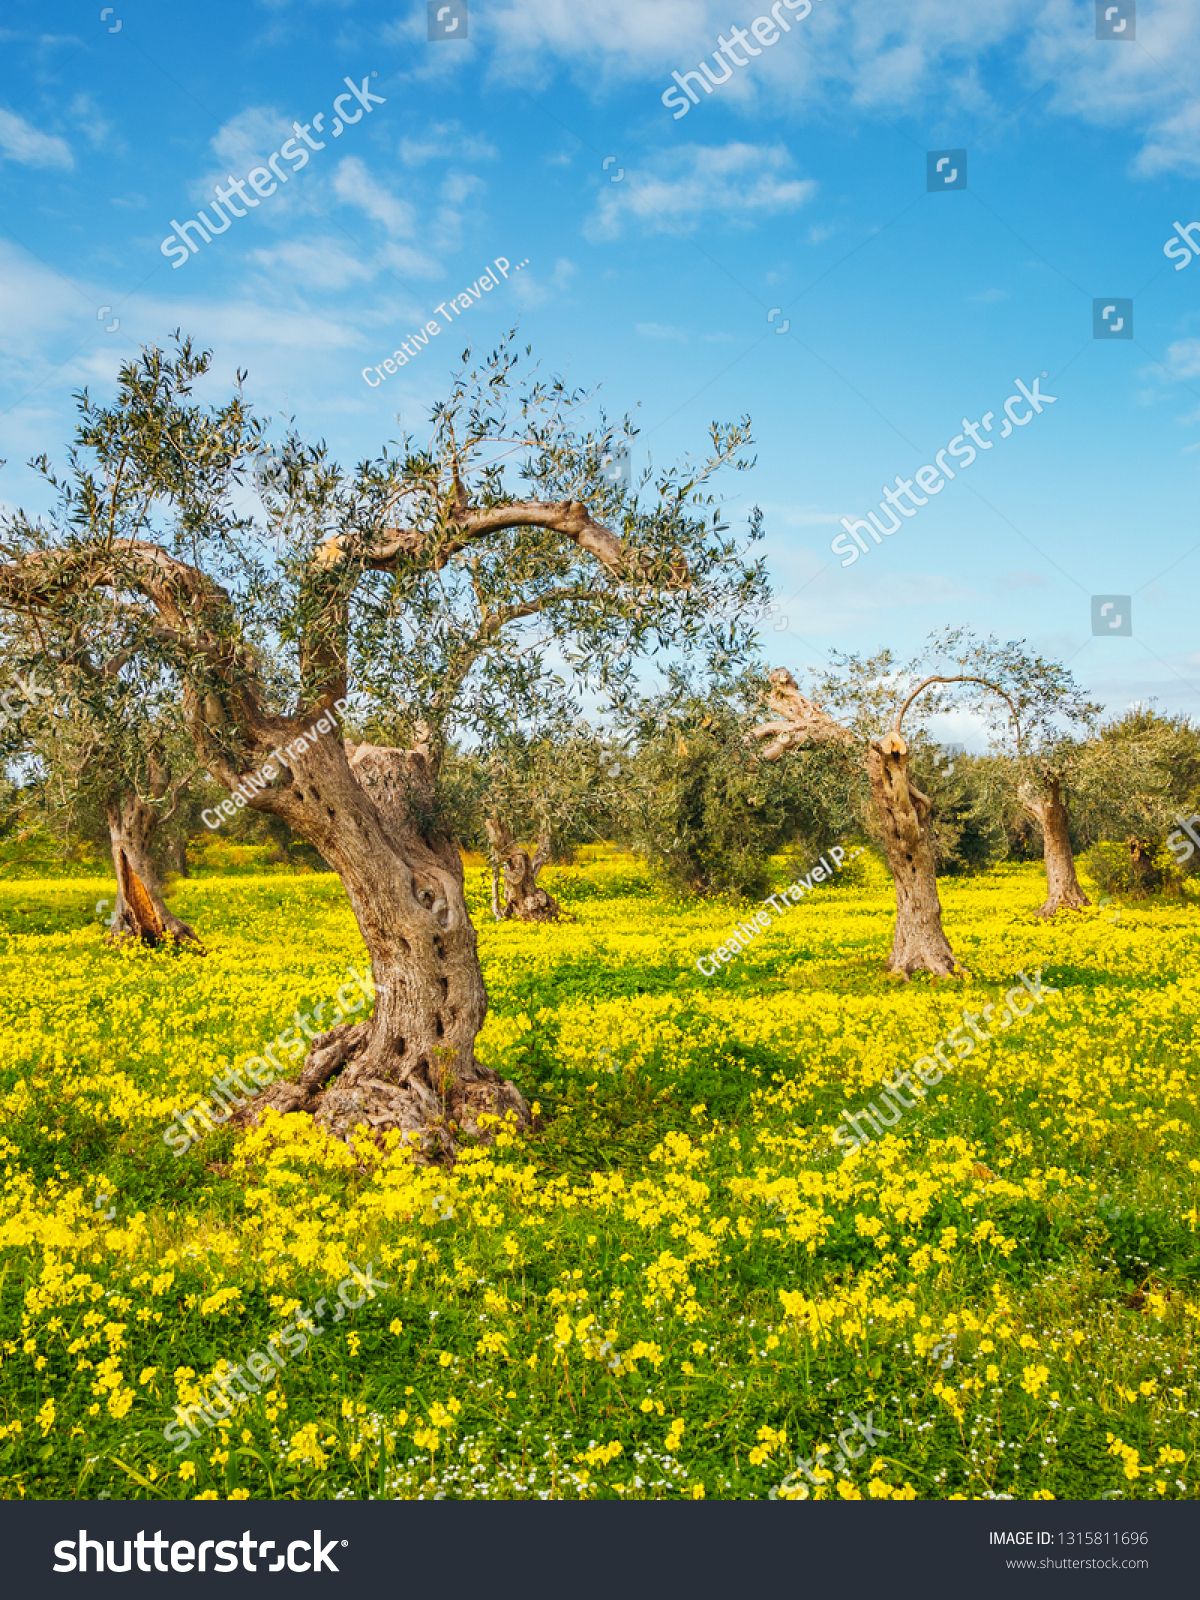 Incredible flowering field in an olive grove. Location place Island Sicily, Italy, Europe. Scenic image of spring time fresh green meadows in sunny day. Vacation season. Discover the beauty of earth. #1315811696